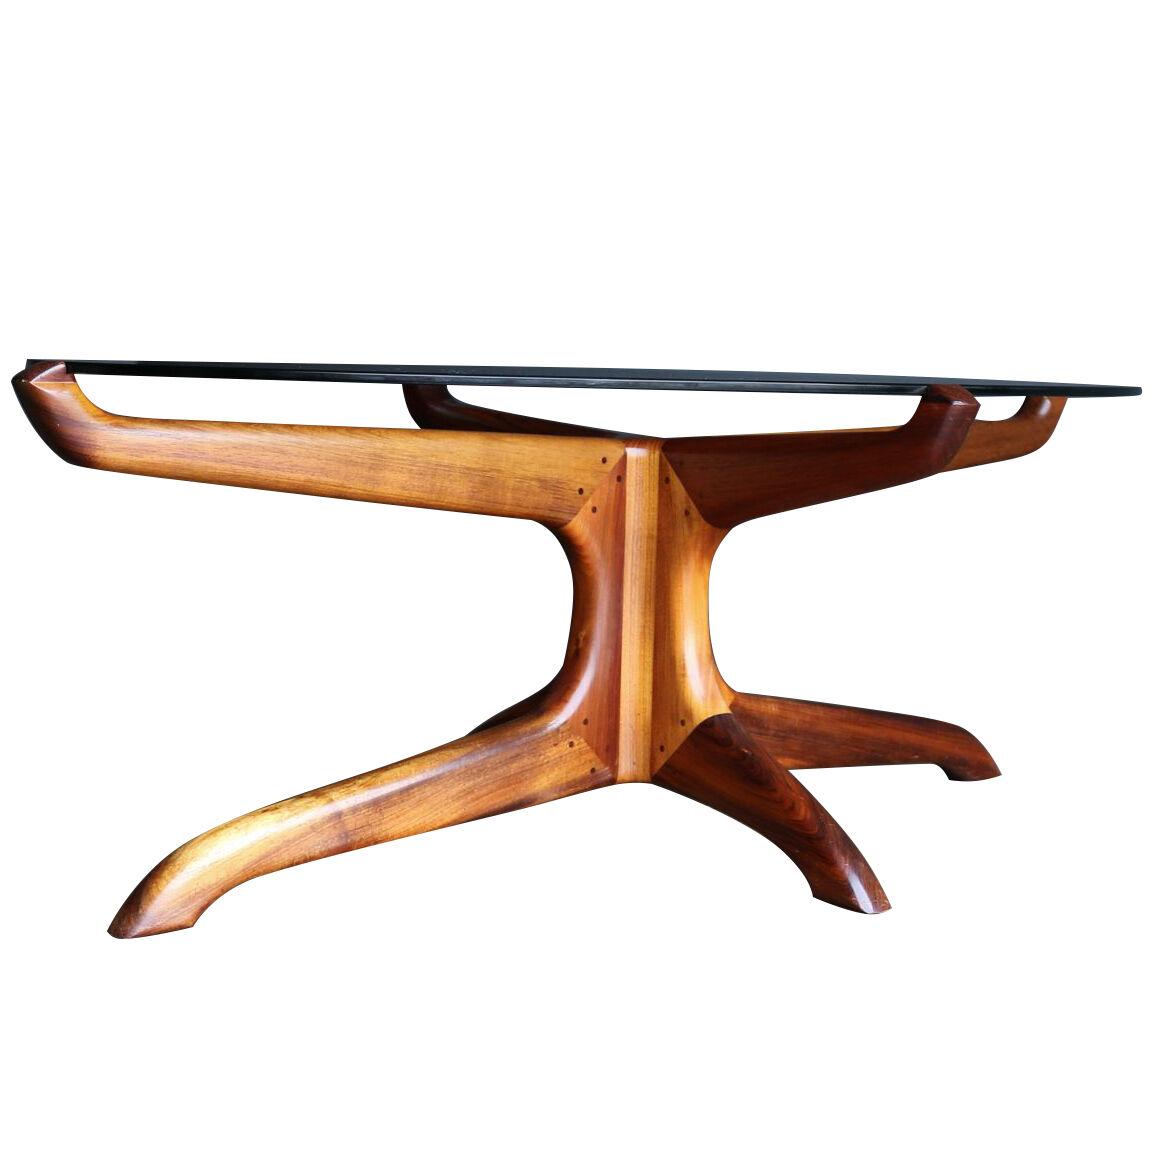 L.H. Kagawa Handcrafted Sculptural Coffee Table, 1994